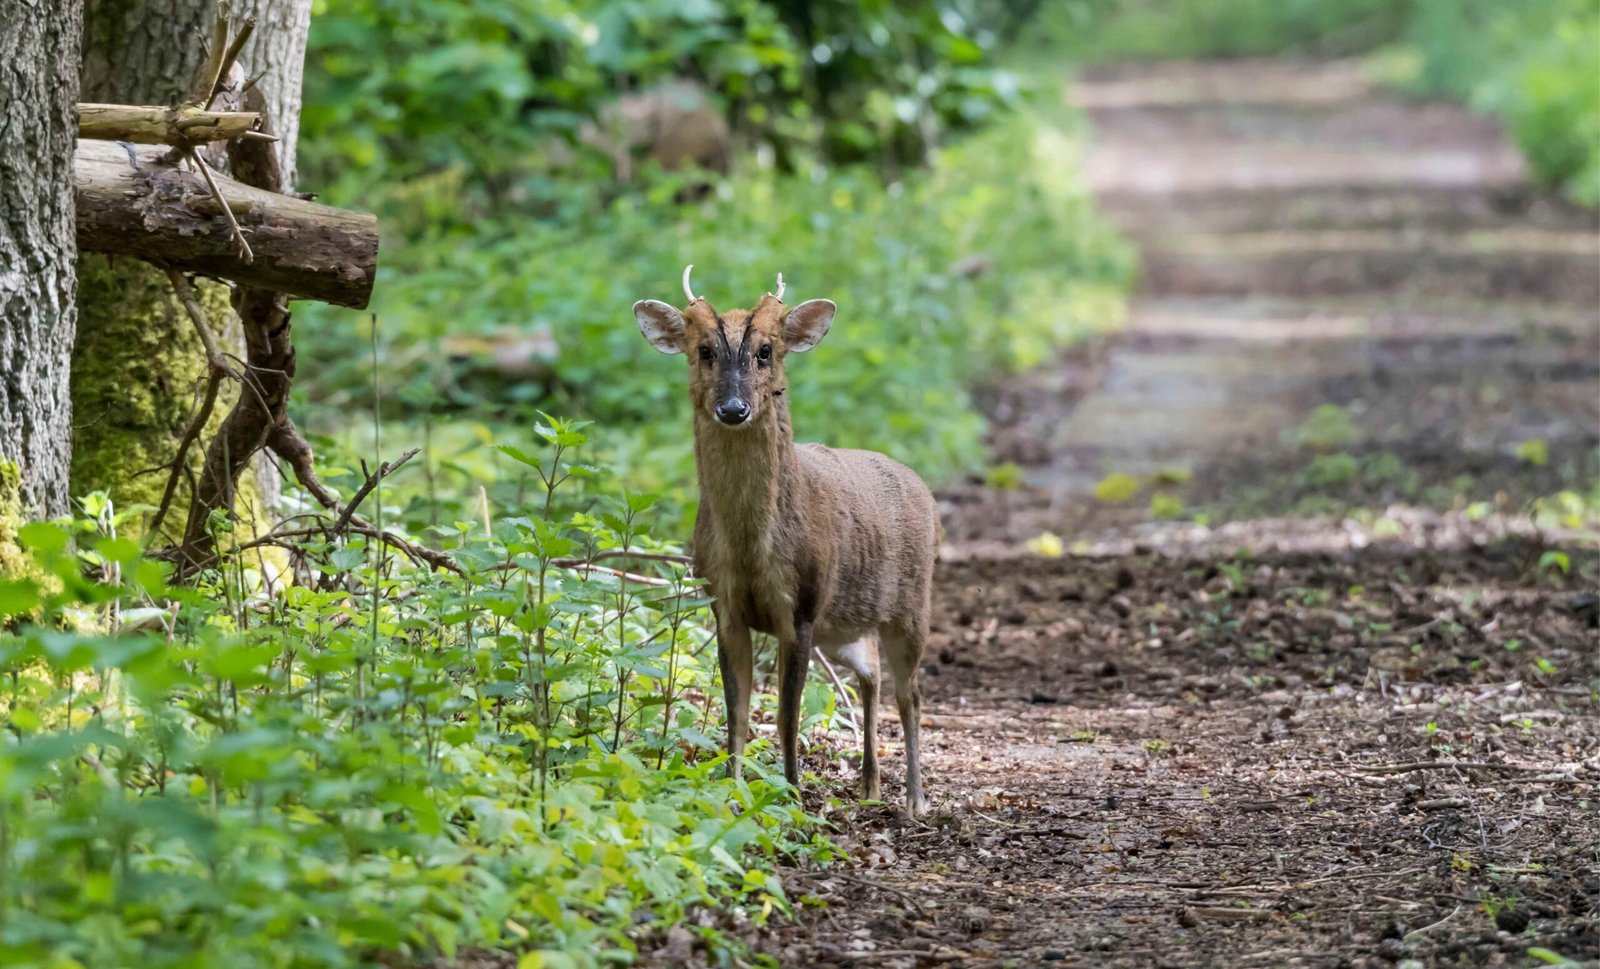 The Unique Features of a Muntjac Deer's Face